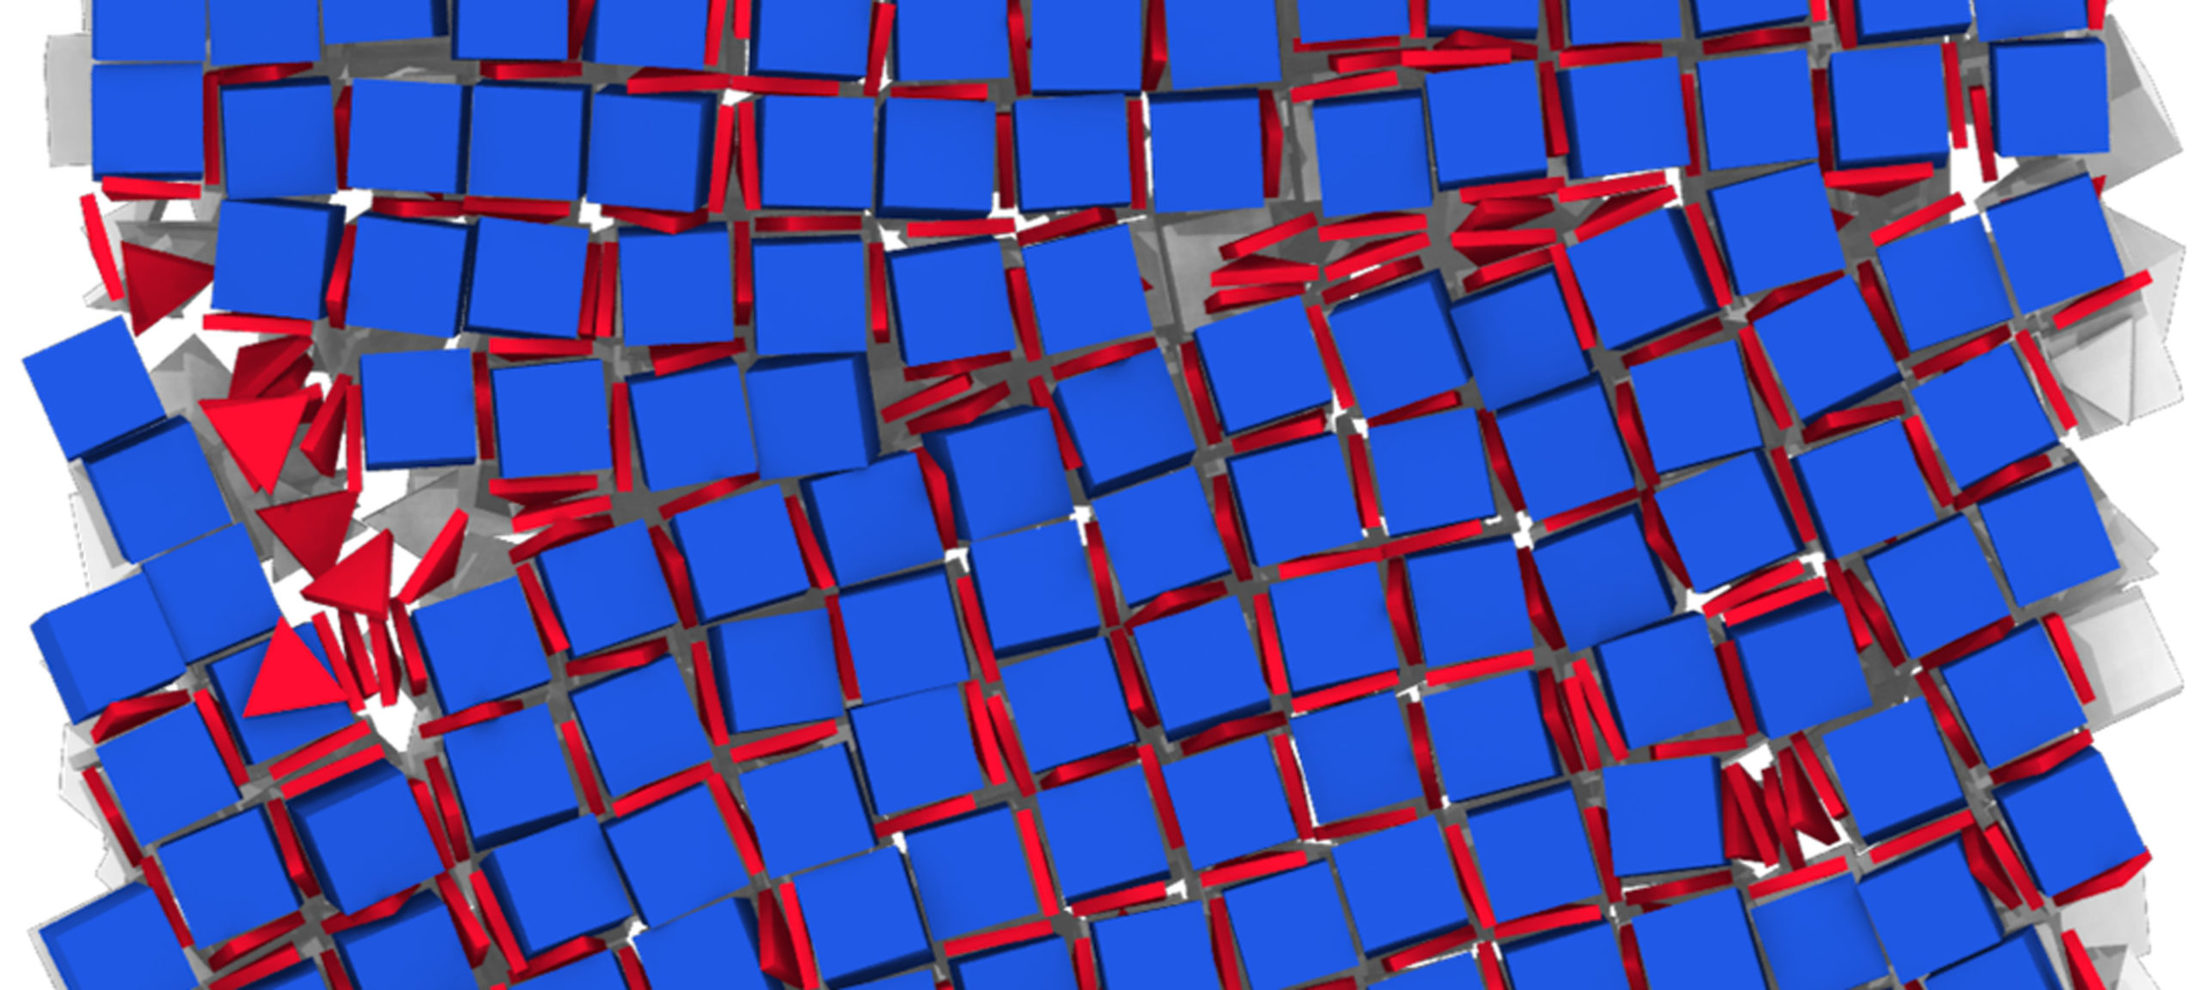 Computer simulations identified the conditions under which nanoscale cubes would self-assemble into a grid, incorporating flat triangular shapes between them. This technique could help enable new kinds of materials with new properties. Credit: Glotzer Lab, University of Michigan.